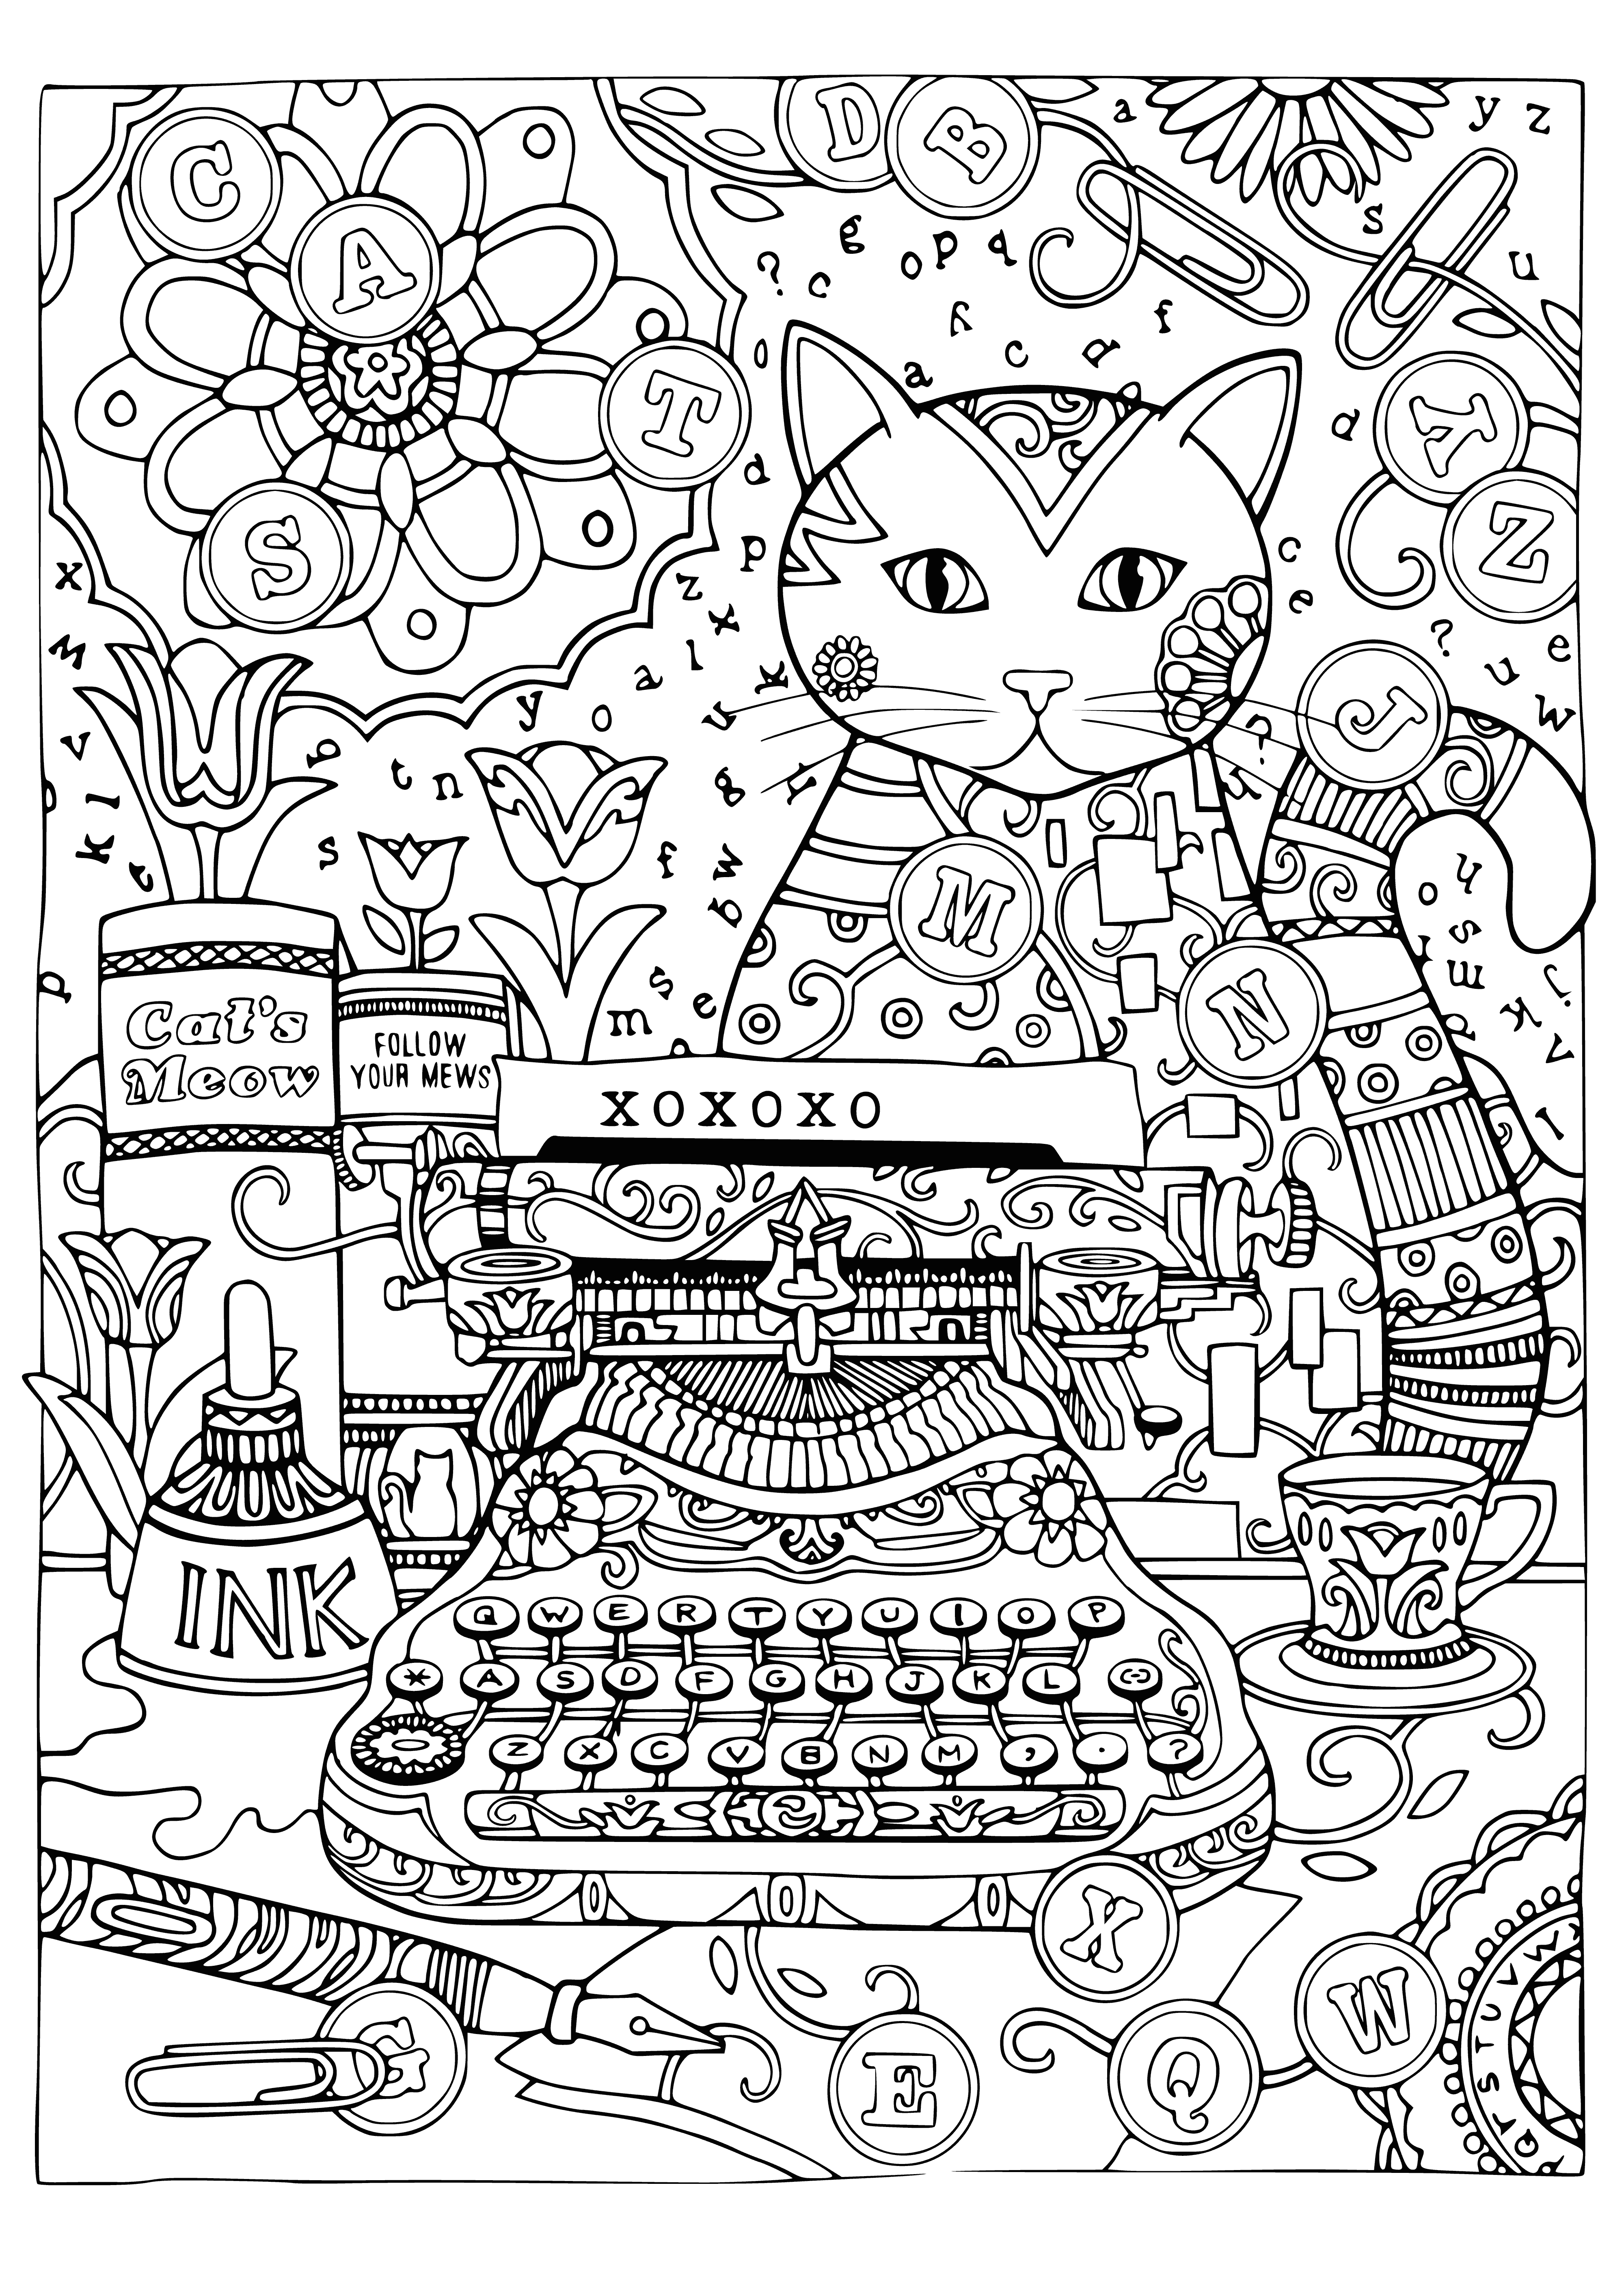 coloring page: Cat sitting at typewriter, paws resting on keys, apparently typing.